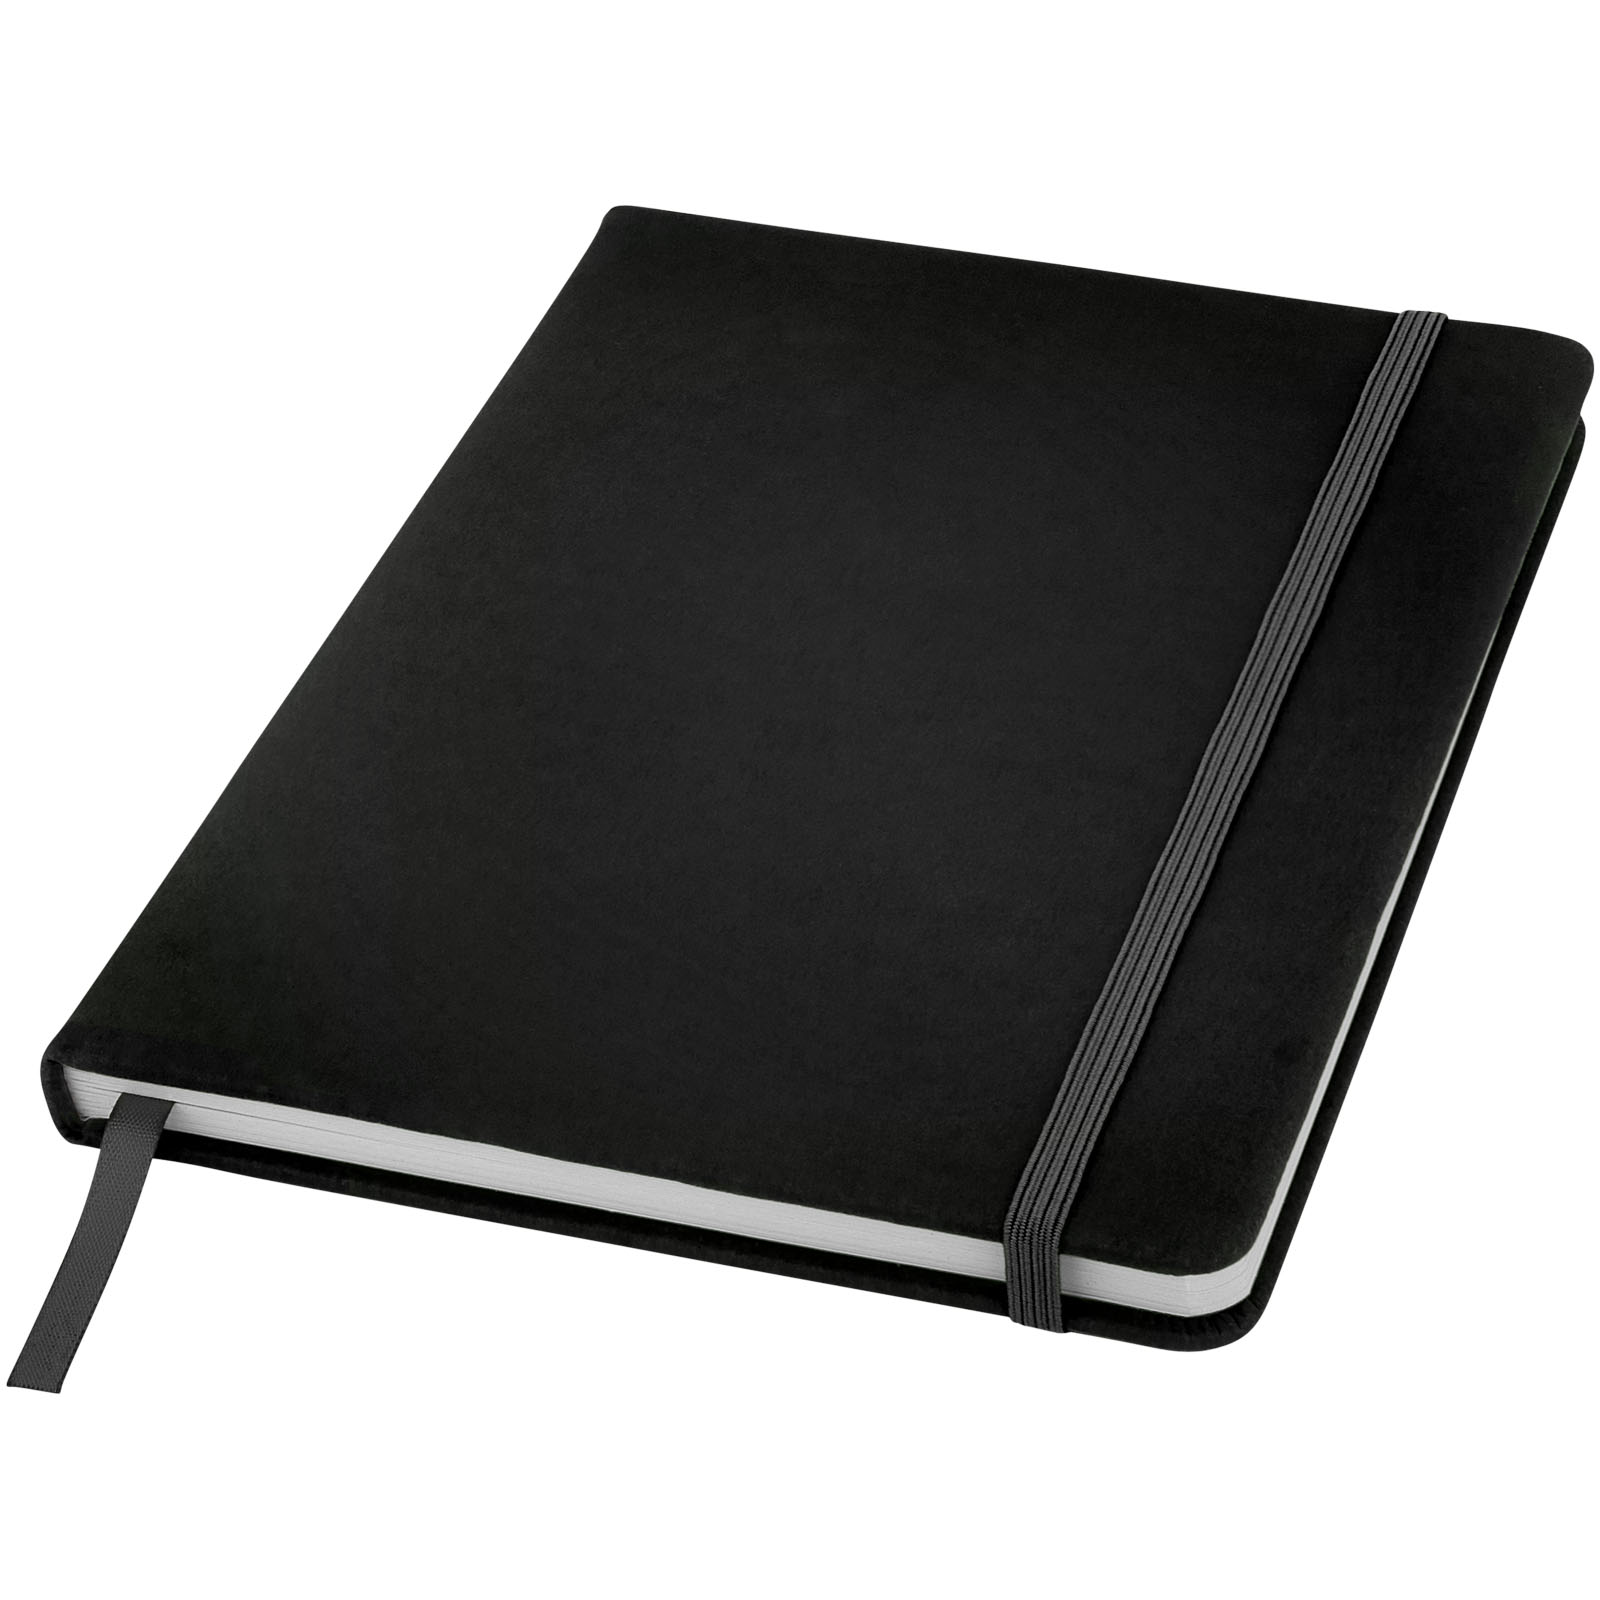 Hard cover notebooks - Spectrum A5 notebook with blank pages